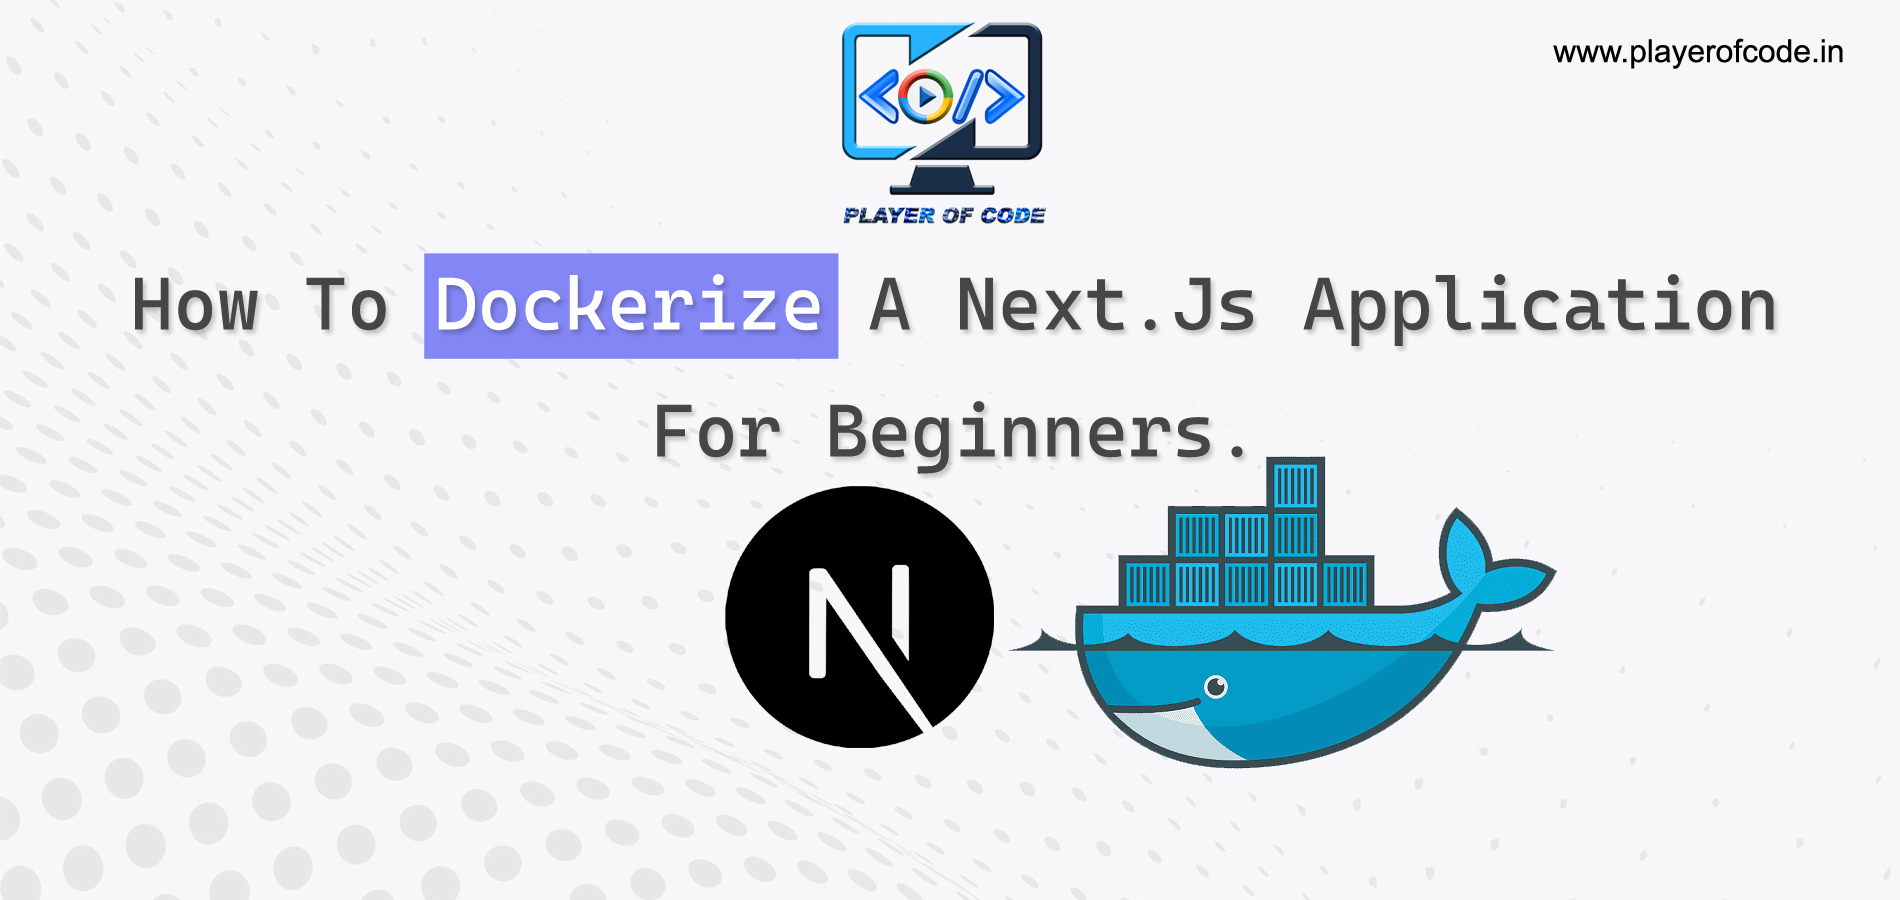 How to Dockerize a Next.js Application for beginners.